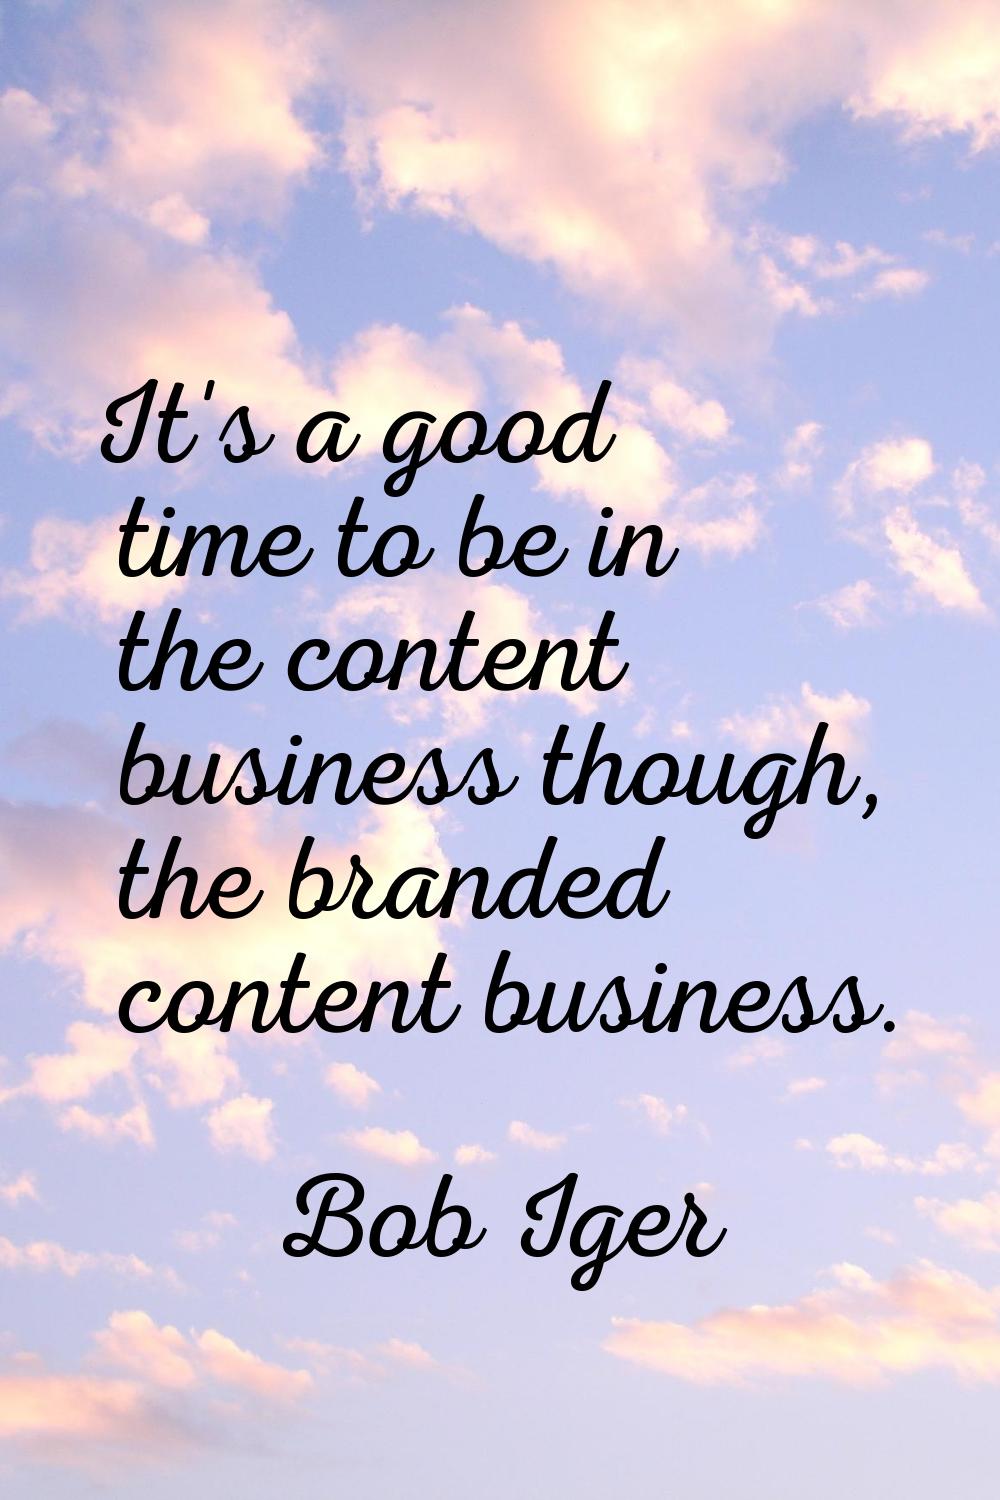 It's a good time to be in the content business though, the branded content business.